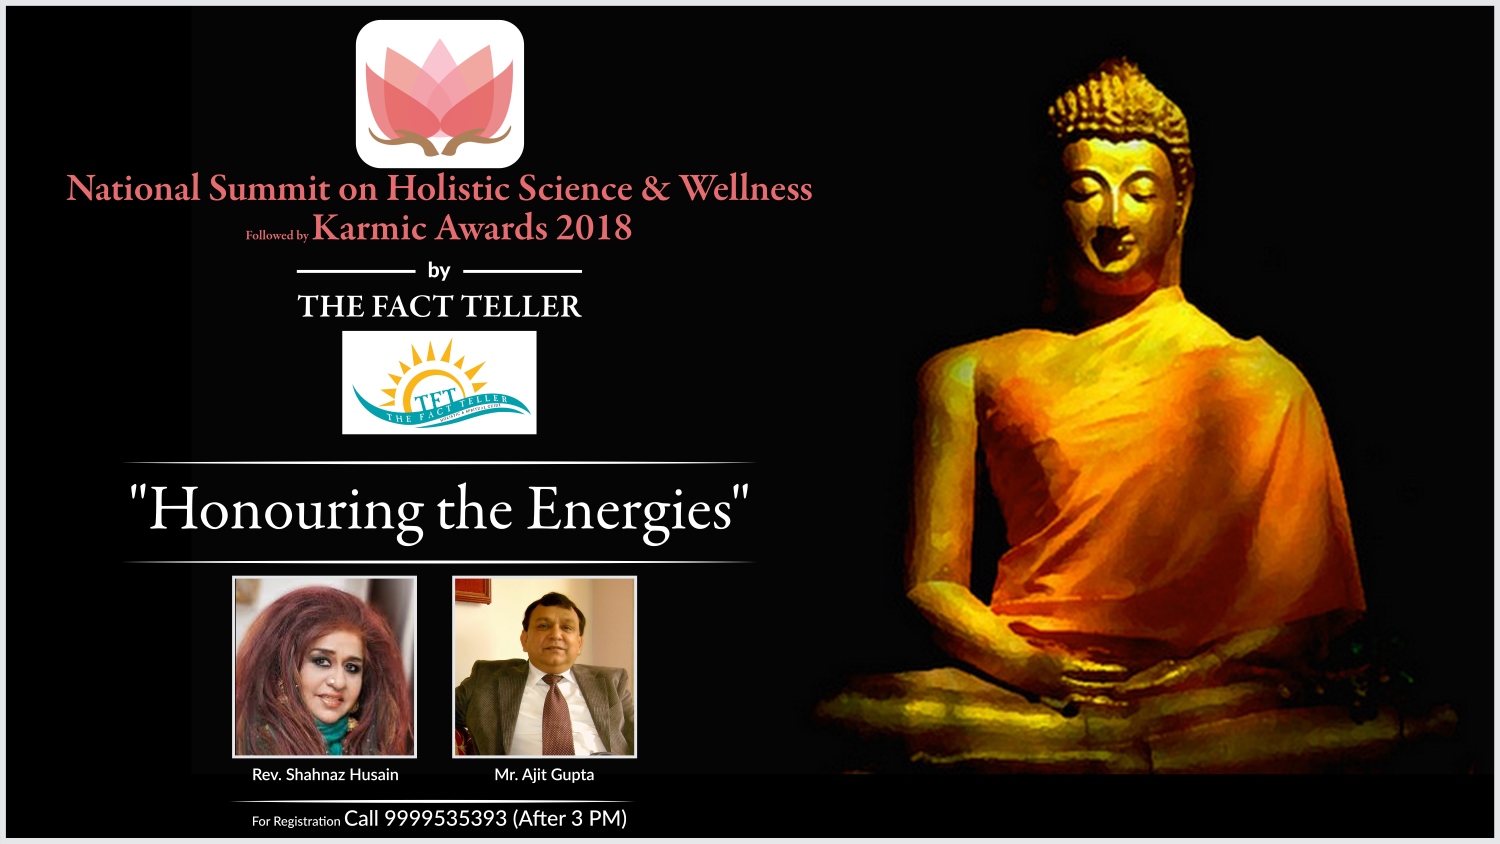 the fact teller magazine 1 - National Summit on Holistic Sciences & Wellness followed by Karmic Awards 2018 - A Day for Peace & Knowledge by The Fact Teller Magazine